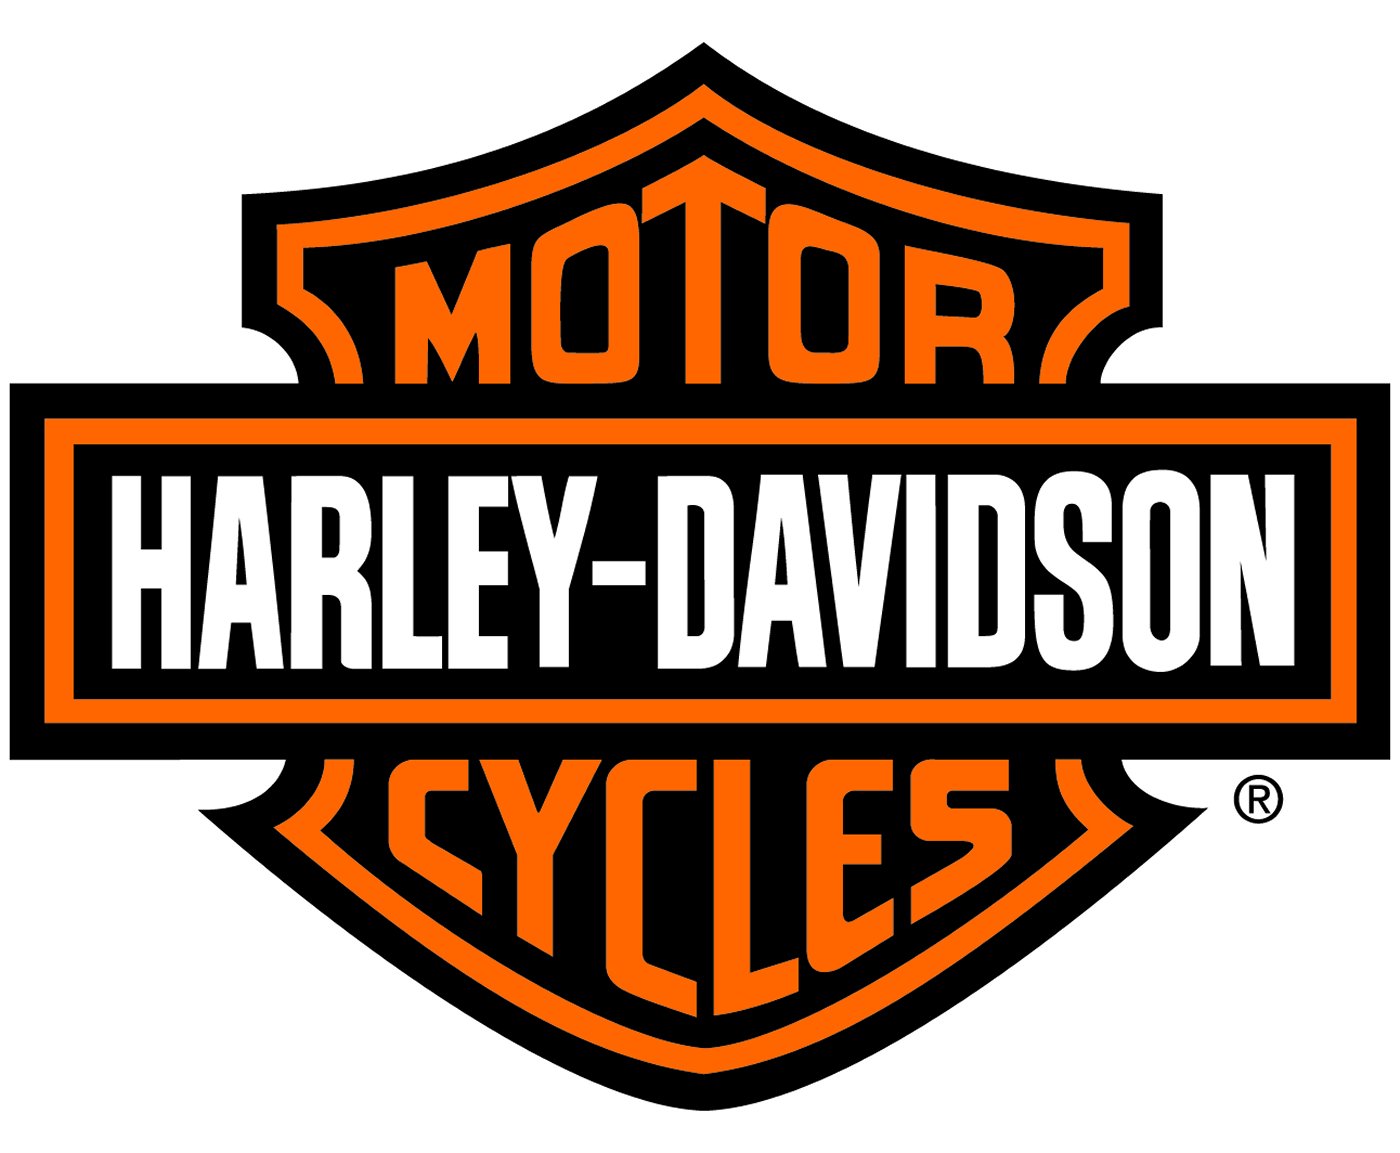 Free Harley Davidson Logo Silhouette Download Free Harley Davidson Logo Silhouette Png Images Free Cliparts On Clipart Library